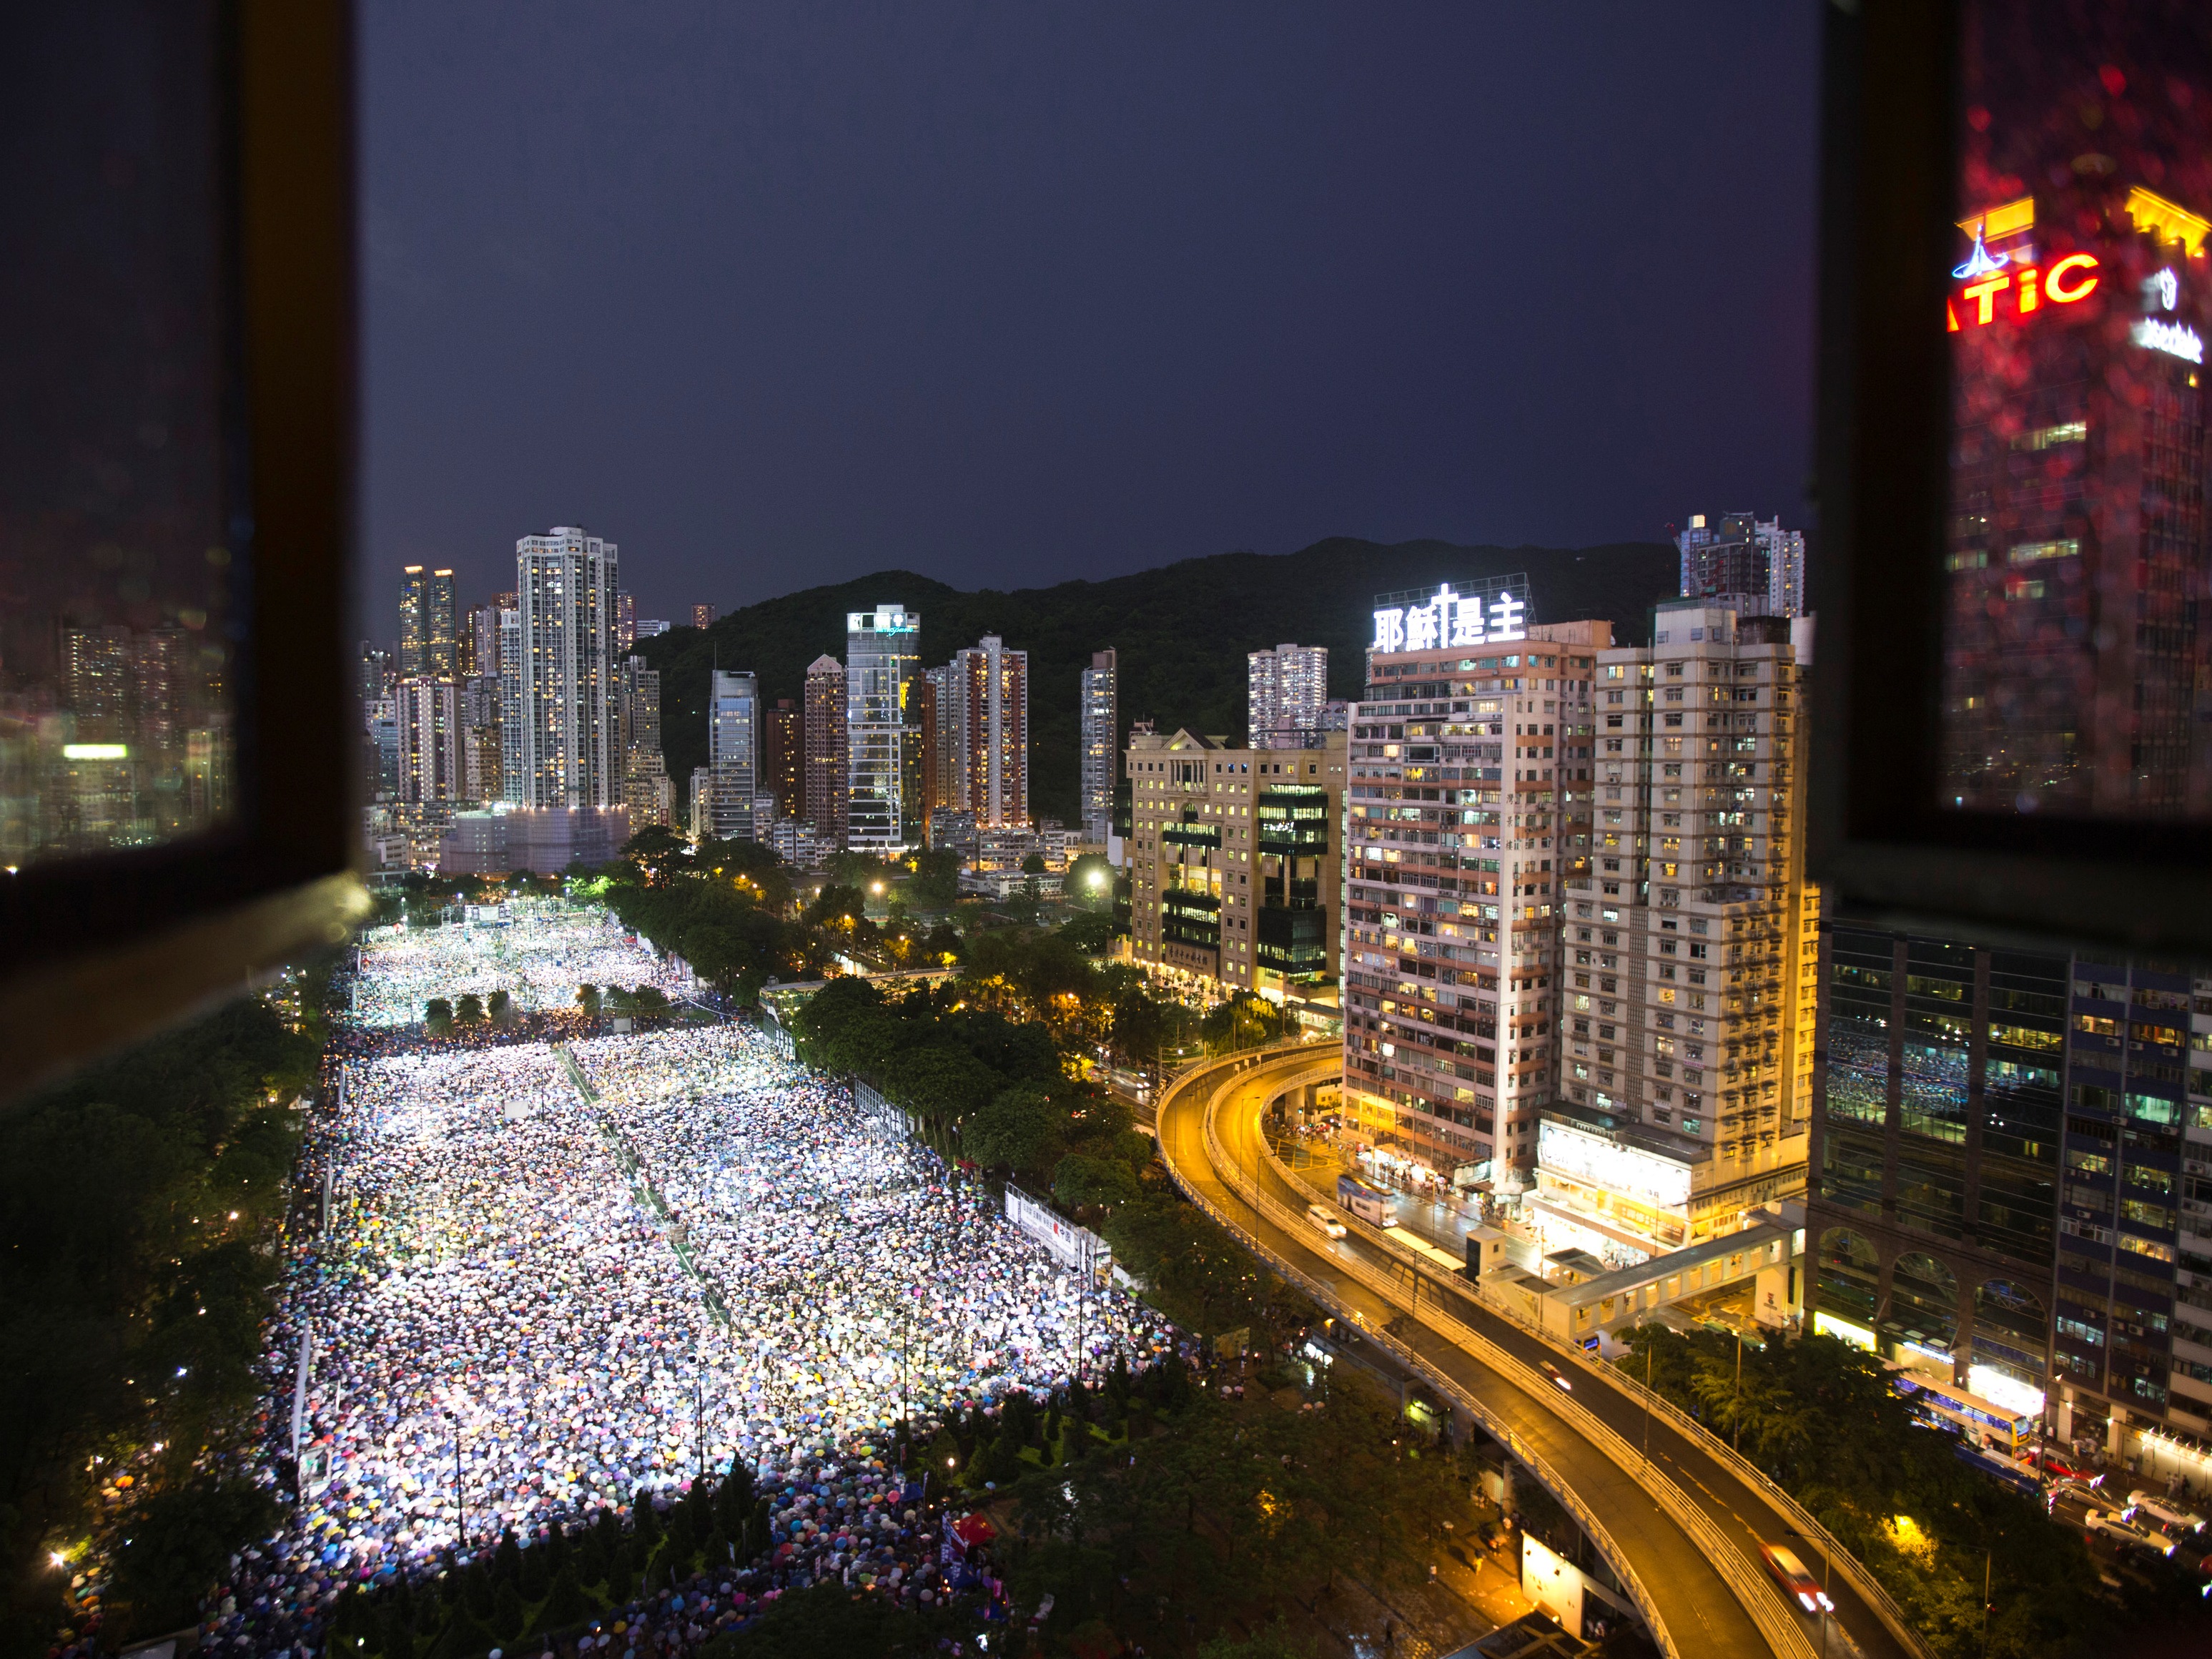 Tens of thousands of people participate in a candlelight vigil in Hong Kong to mark the 24th anniversary of the 1989 crackdown on the pro-democracy movement in Beijing